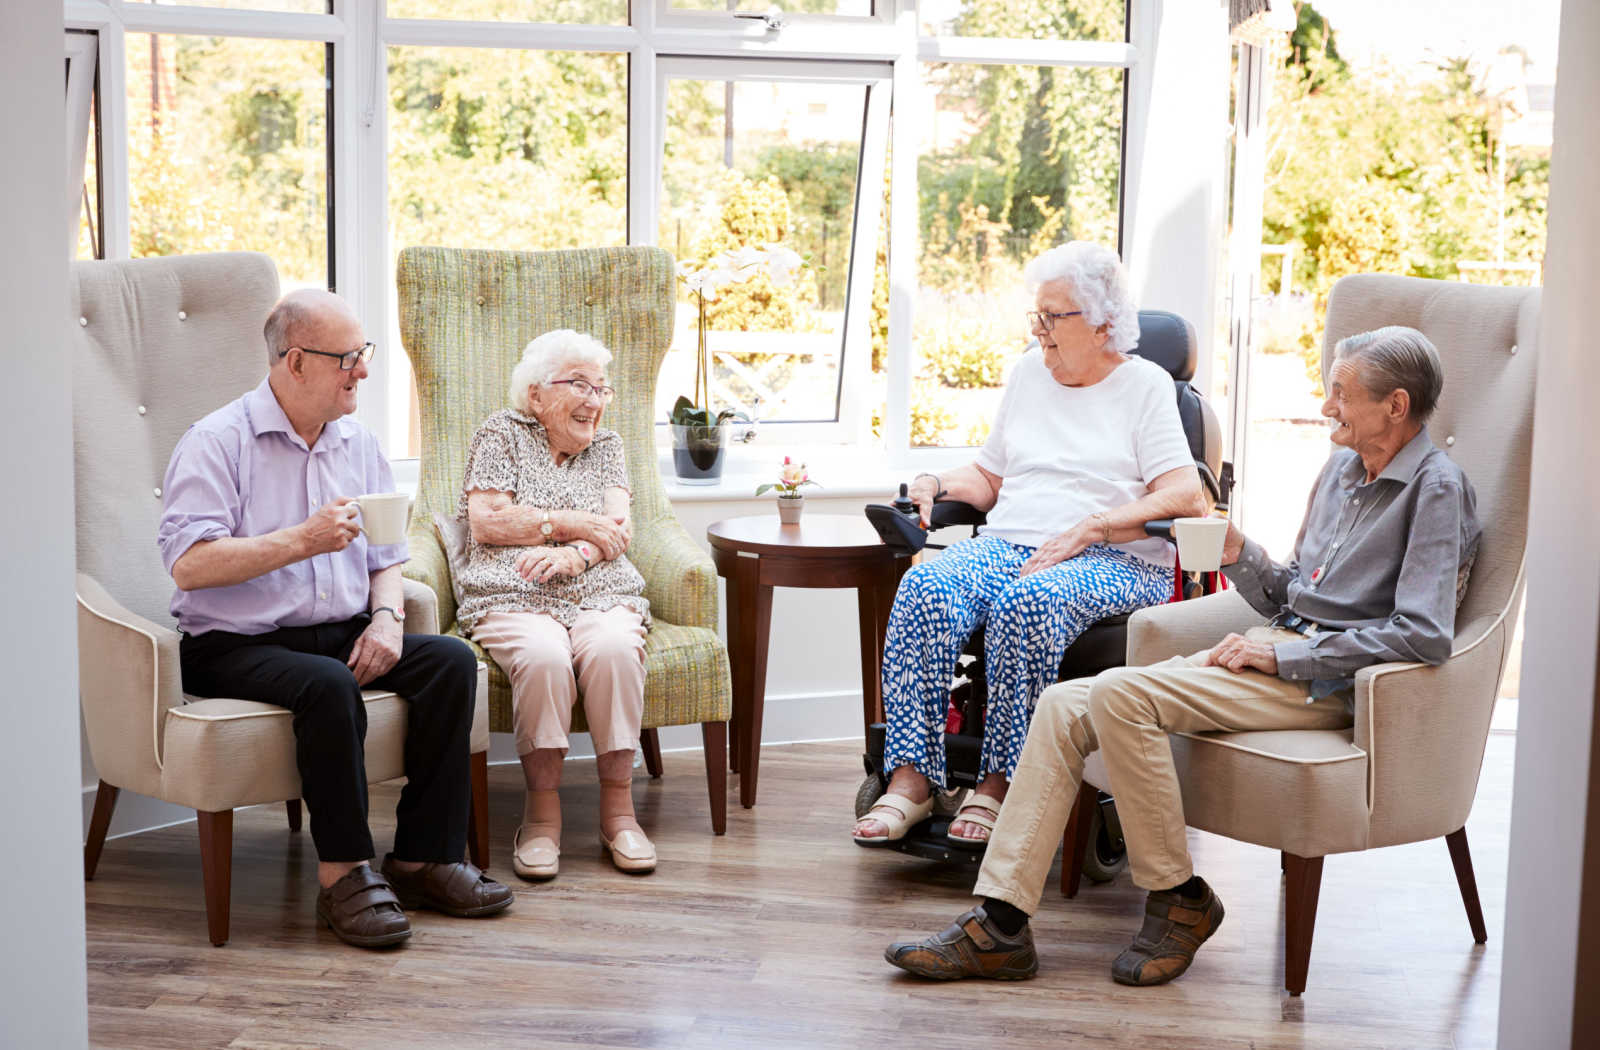 Group of seniors sitting smiling and chatting with each other in a senior living facility.